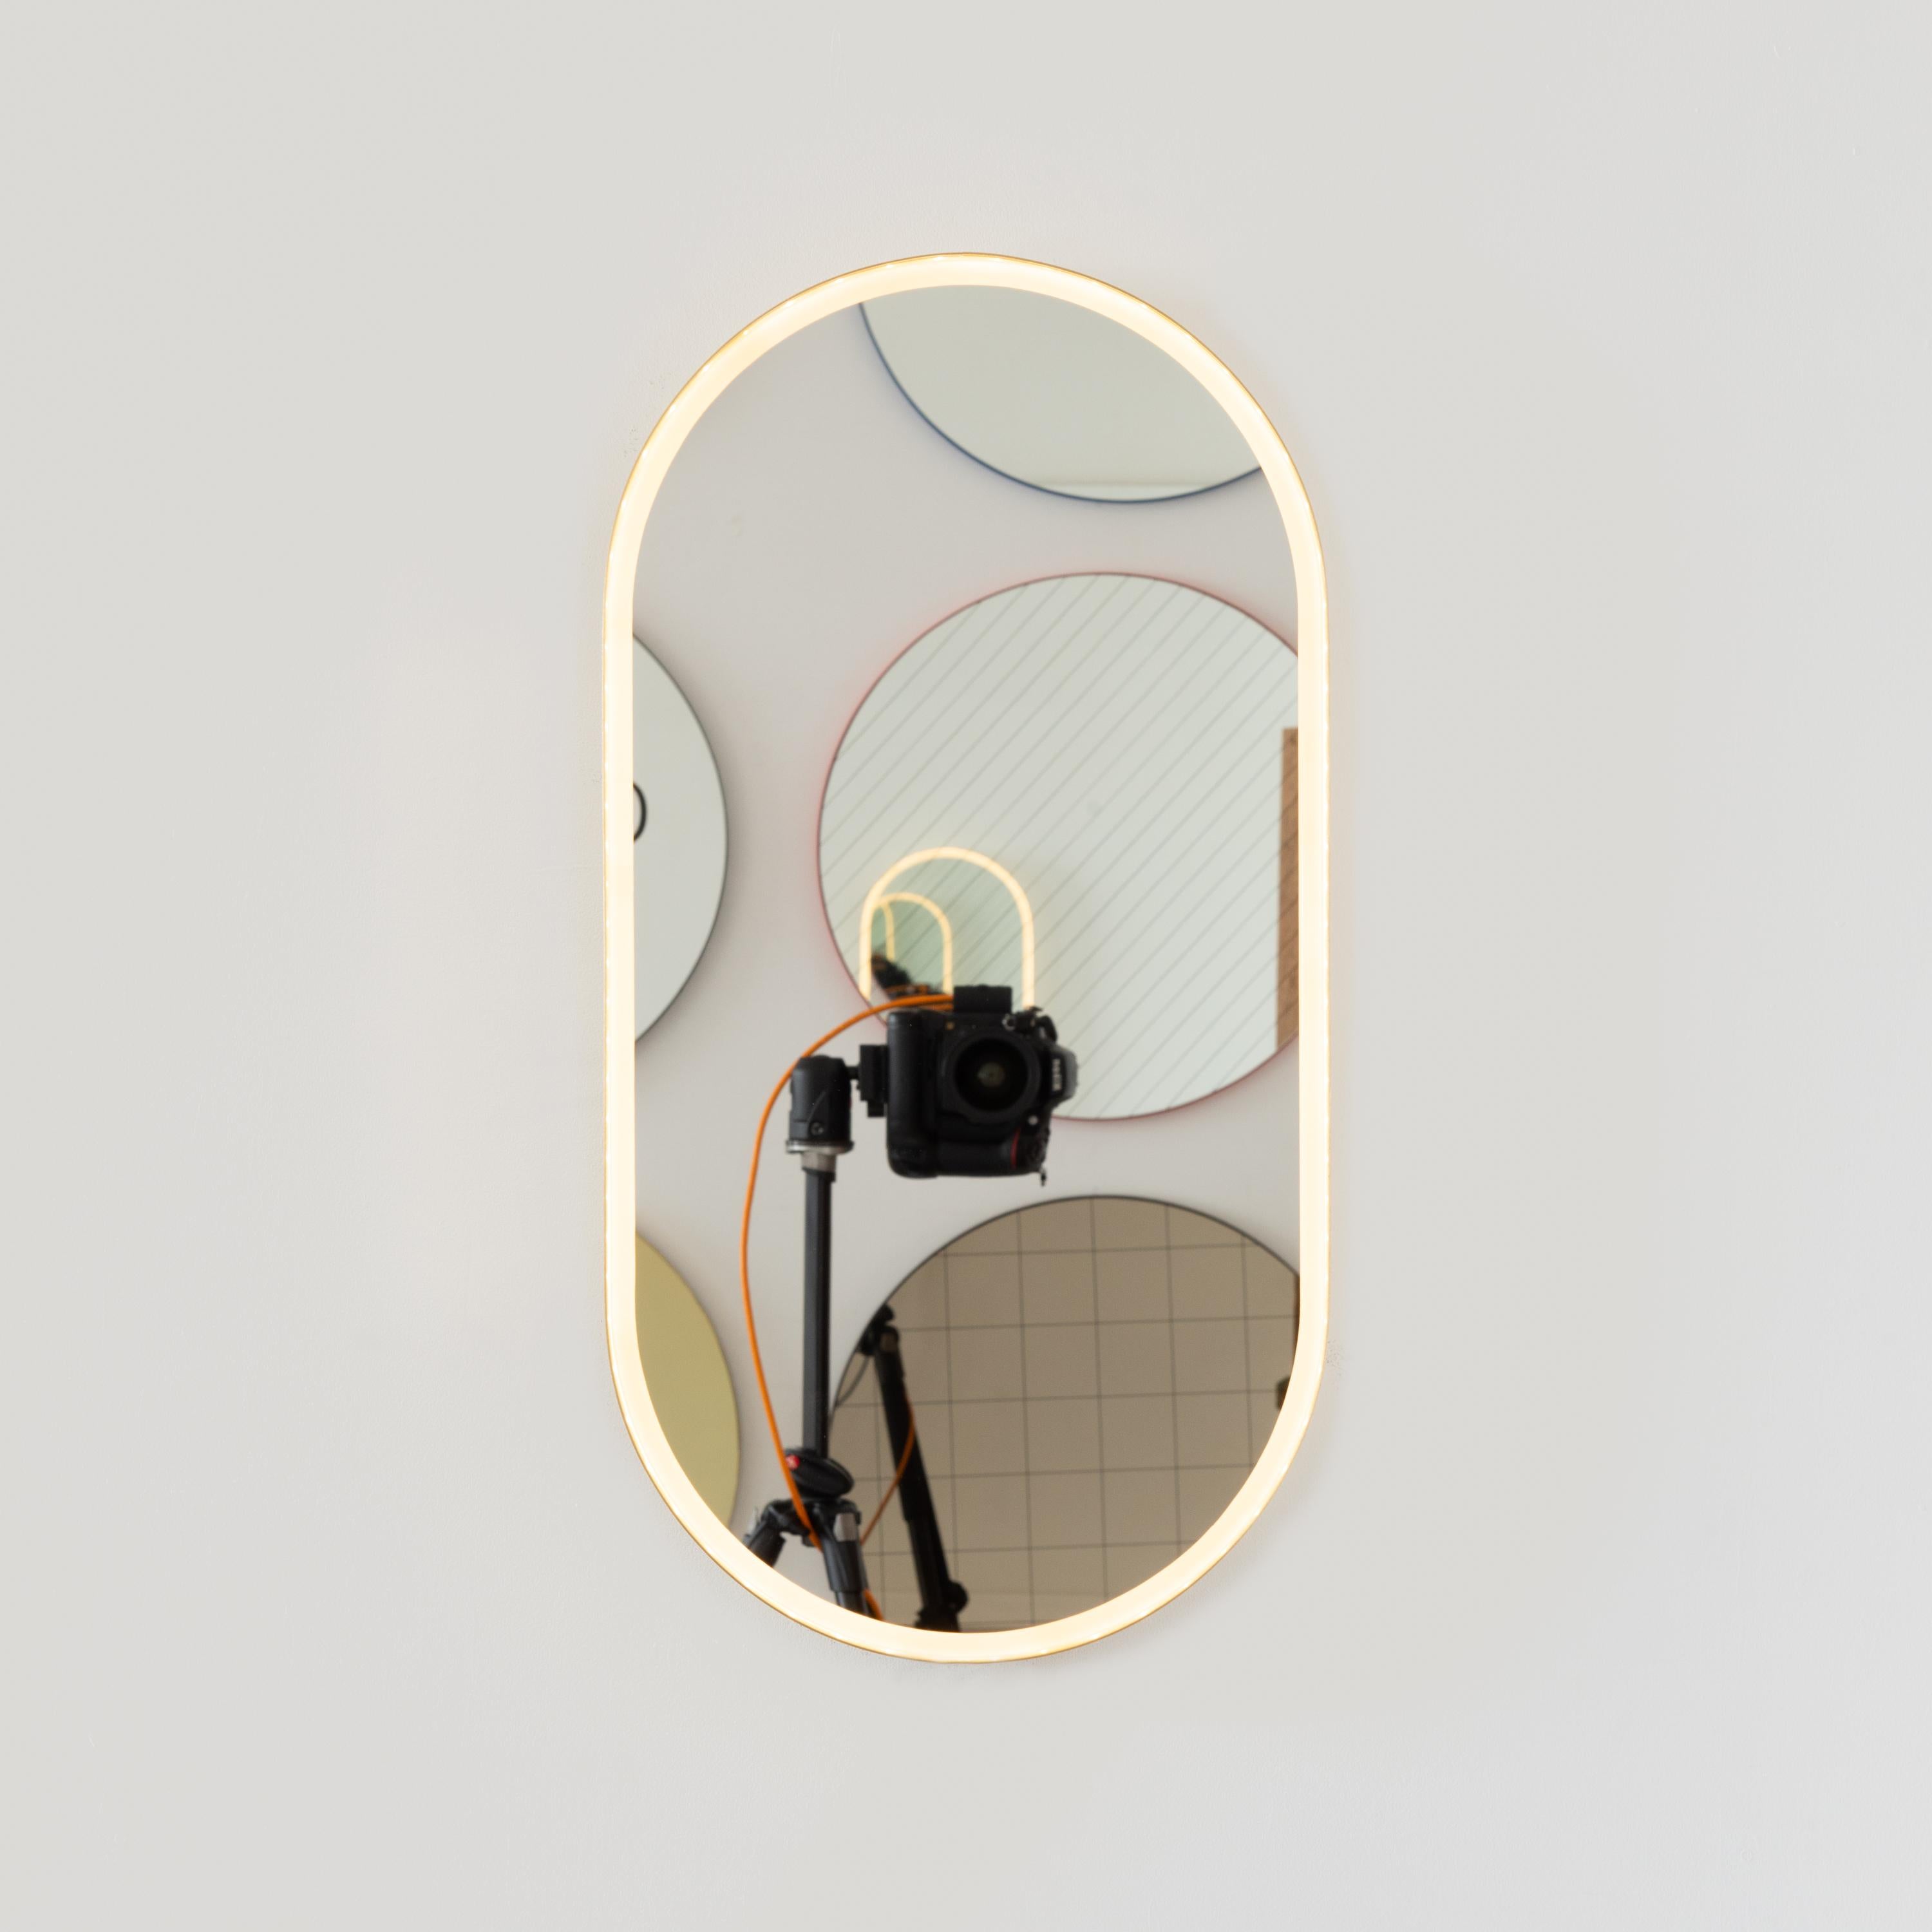 Modern handcrafted front illuminated capsule shaped mirror with an elegant brushed brass frame. Designed and handcrafted in London, UK.

Medium, large and extra-large (37cm x 56cm, 46cm x 71cm and 48cm x 97cm) mirrors are fitted with an ingenious